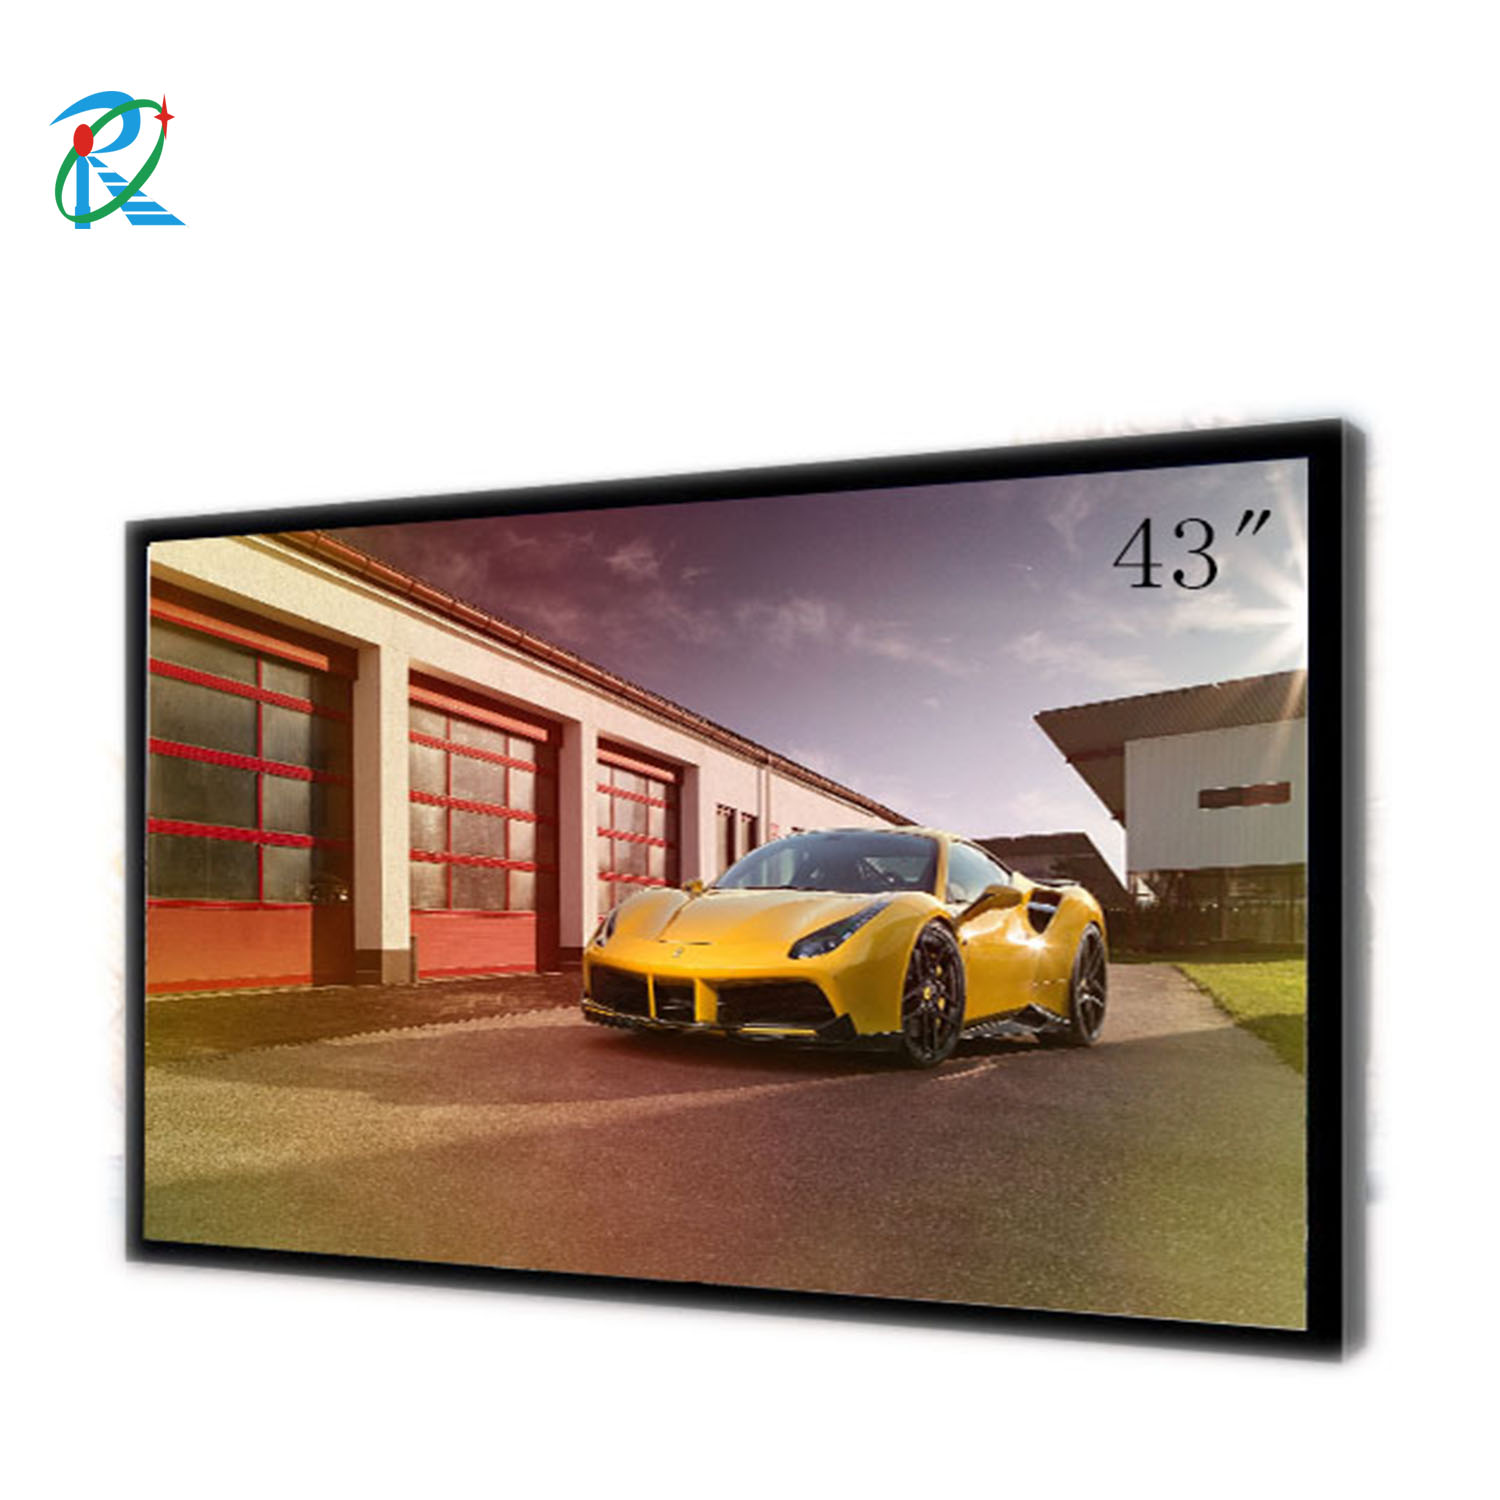 43 inch 3000 nit outdoor high brightness LCD display